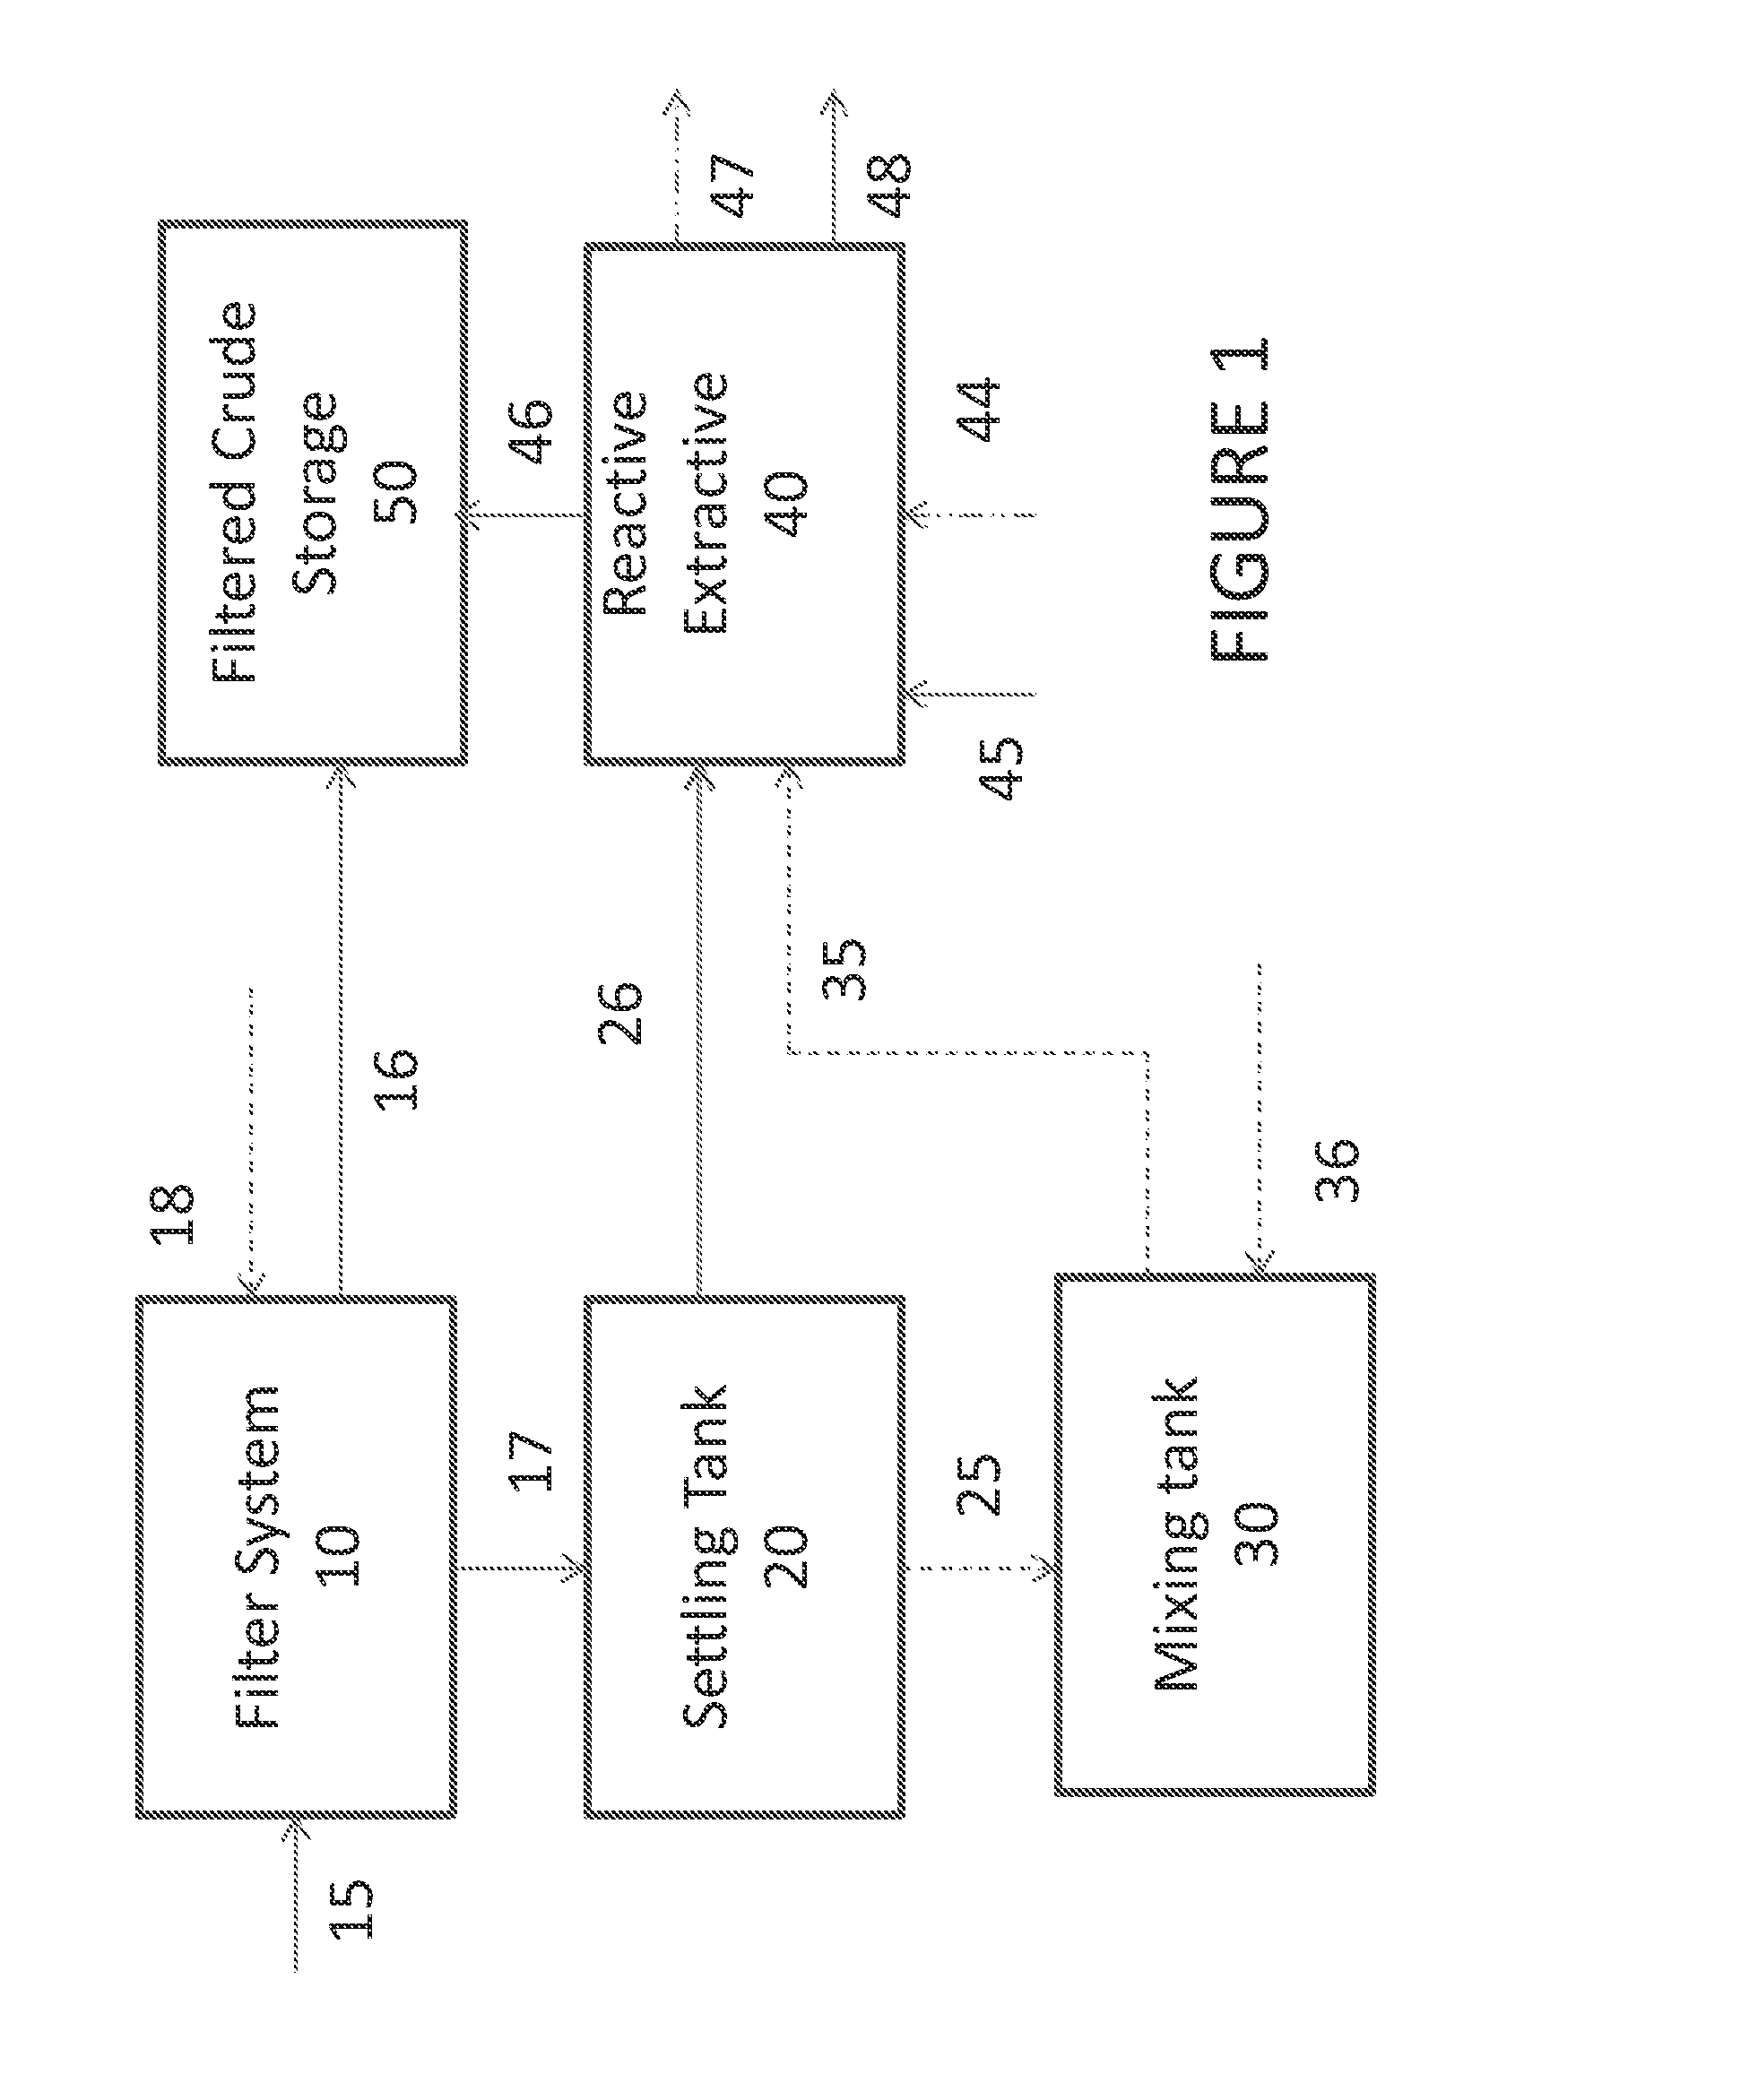 Process, Method, and System for Removing Heavy Metals from Fluids